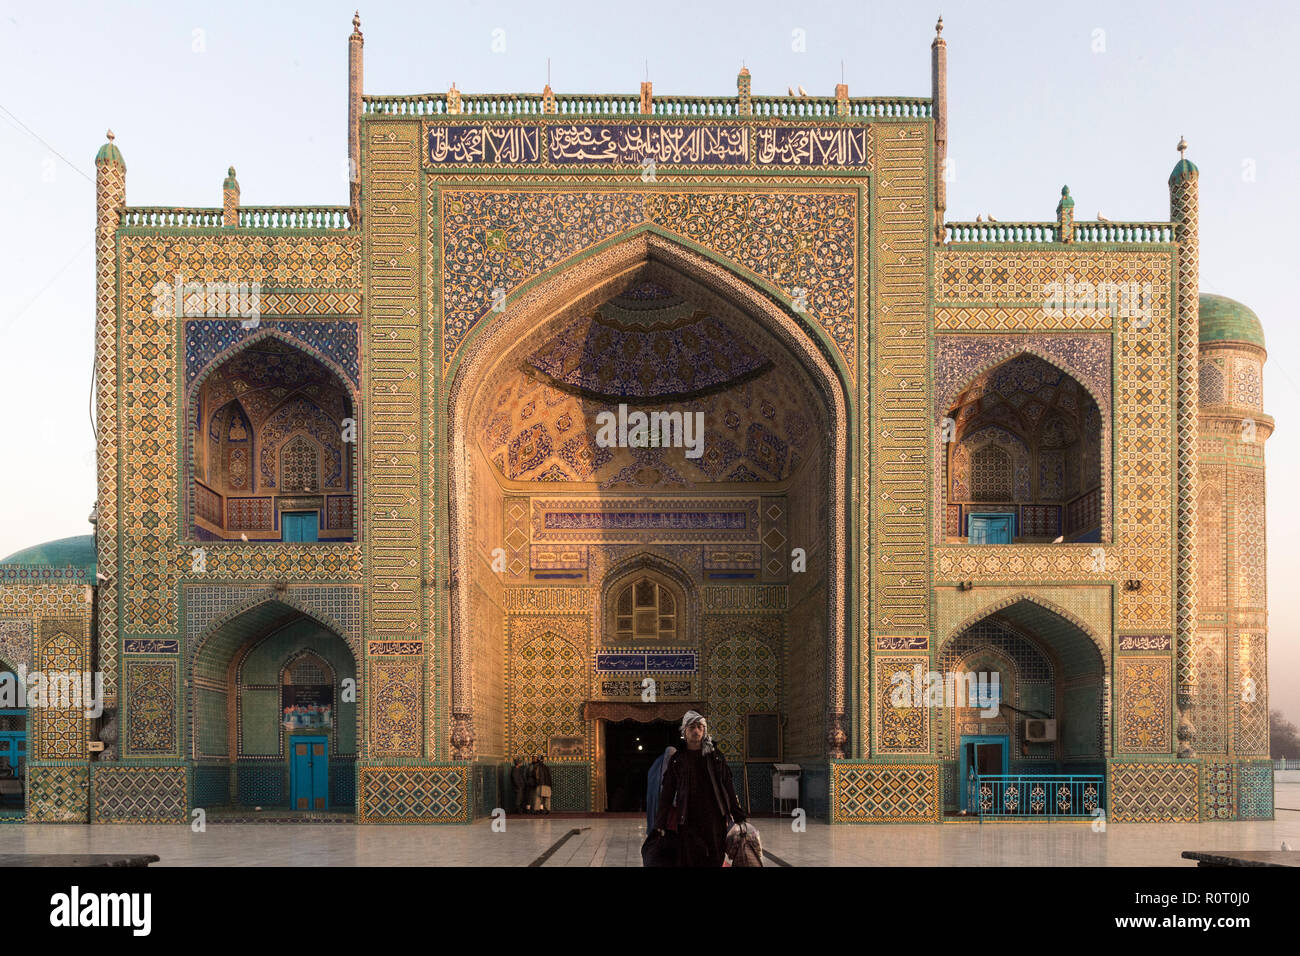 Architecture Of The Shrine Of Hazrat Ali, also called the Blue Mosque, Mazar-e Sharif, Afghanistan Stock Photo